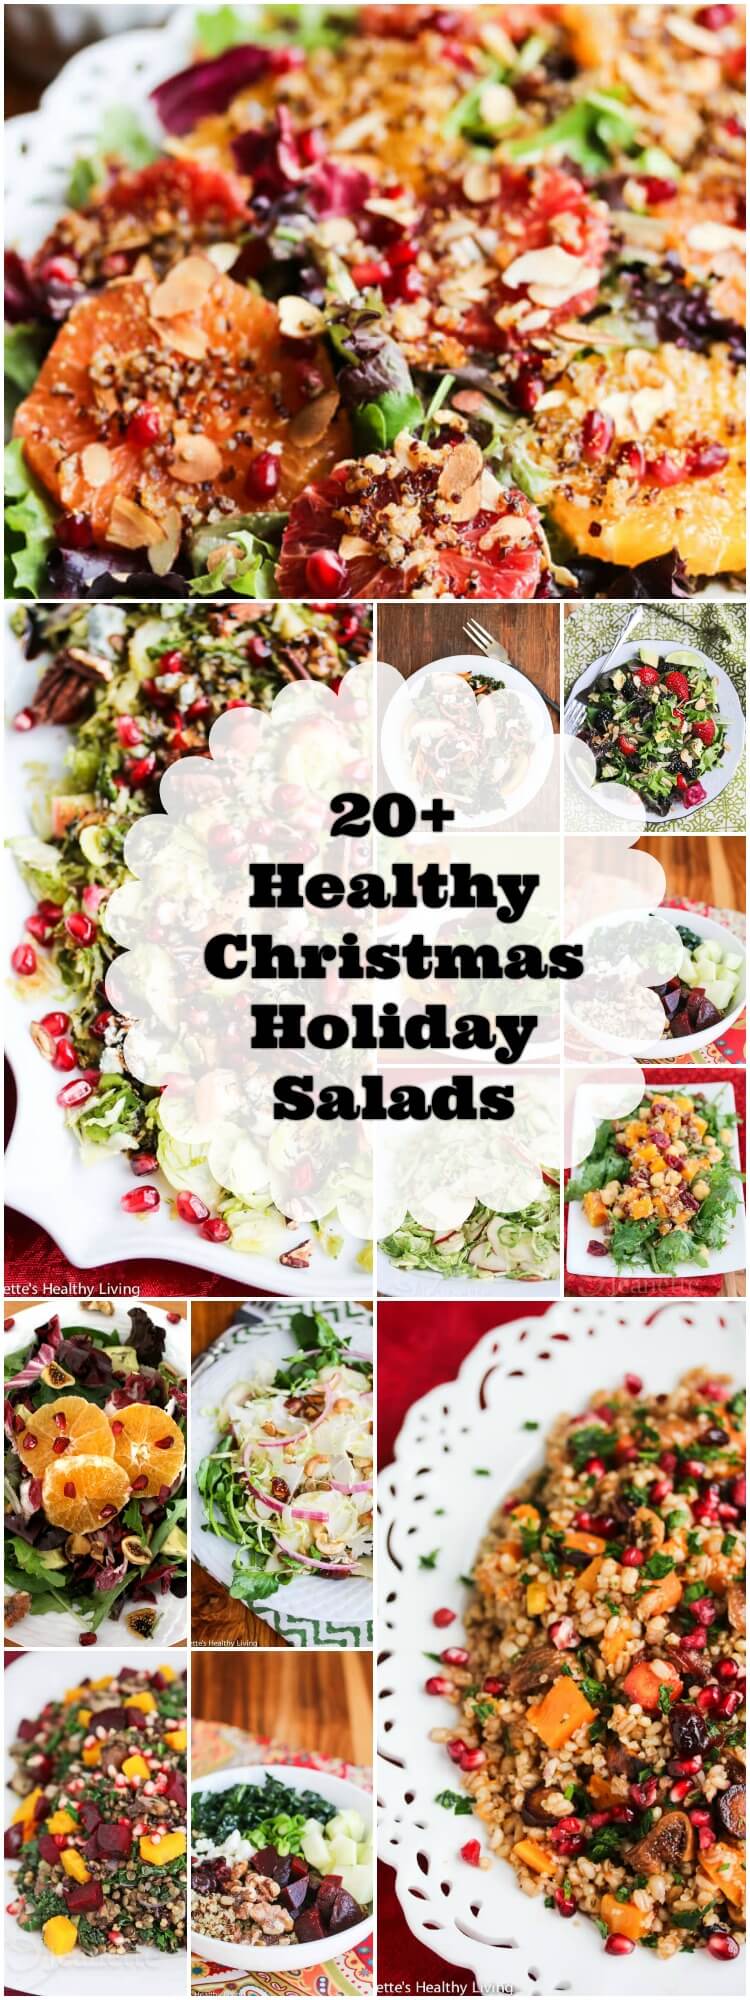 Healthy Christmas Holiday Salad Recipes - lighten up your Christmas holiday menu with one or more of these festive healthy salad recipes